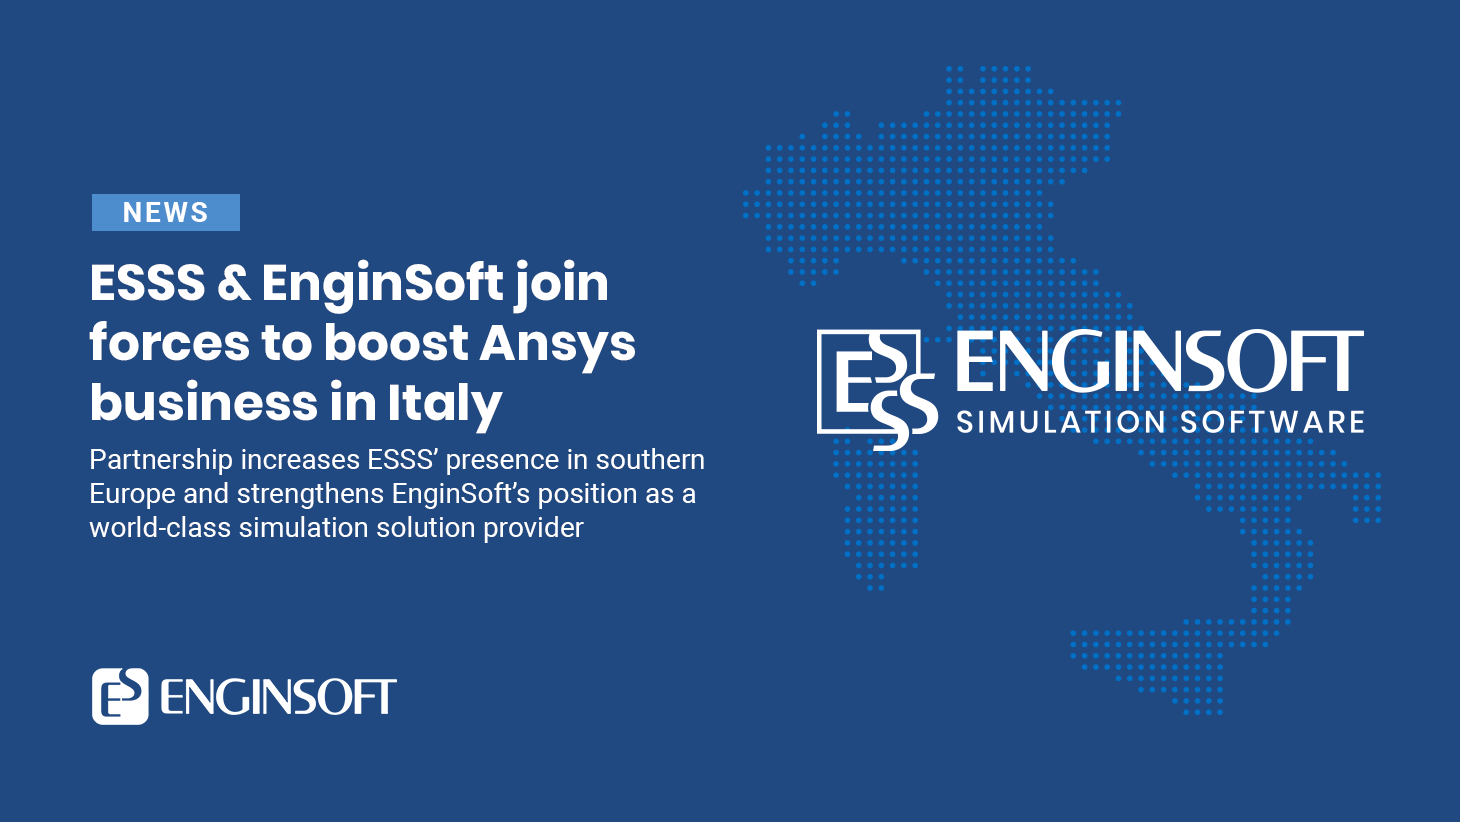 ESSS & EnginSoft join forces to boost Ansys business in Italy